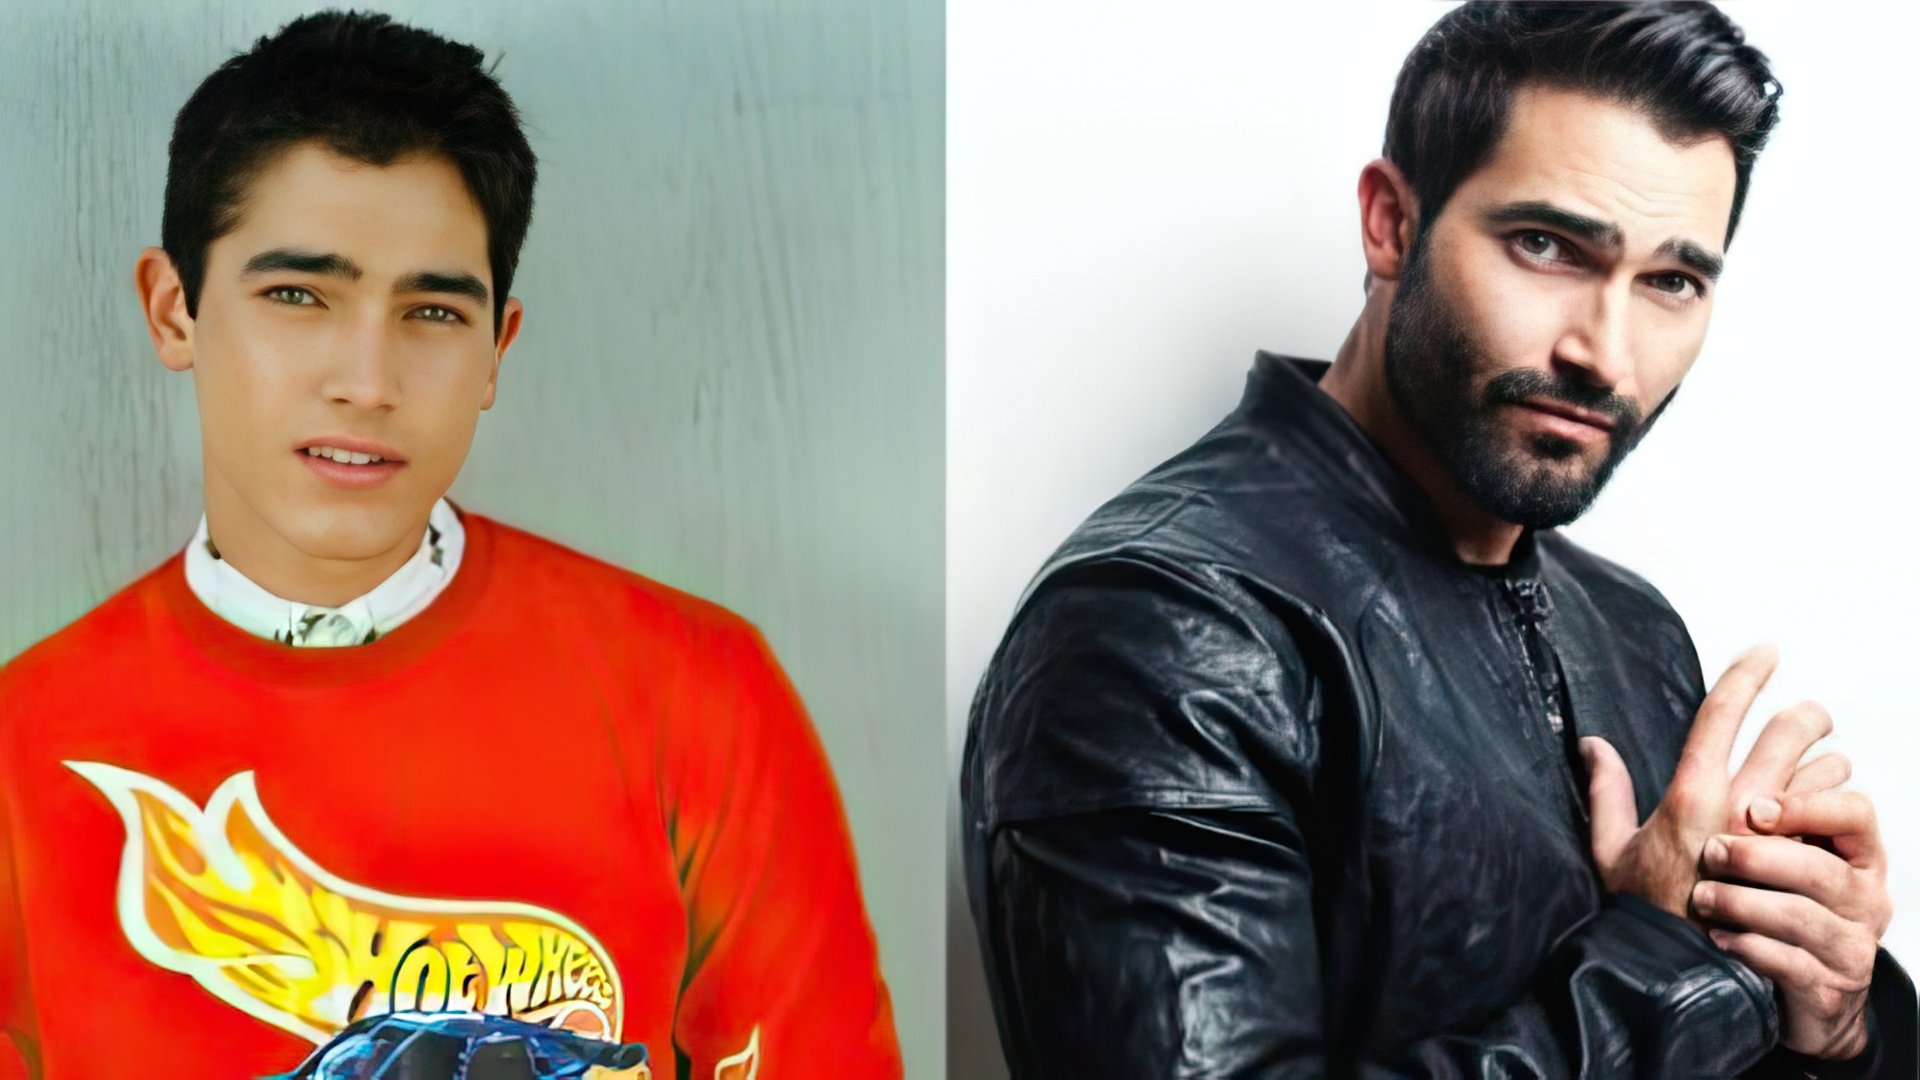 Tyler Hoechlin in his youth and now